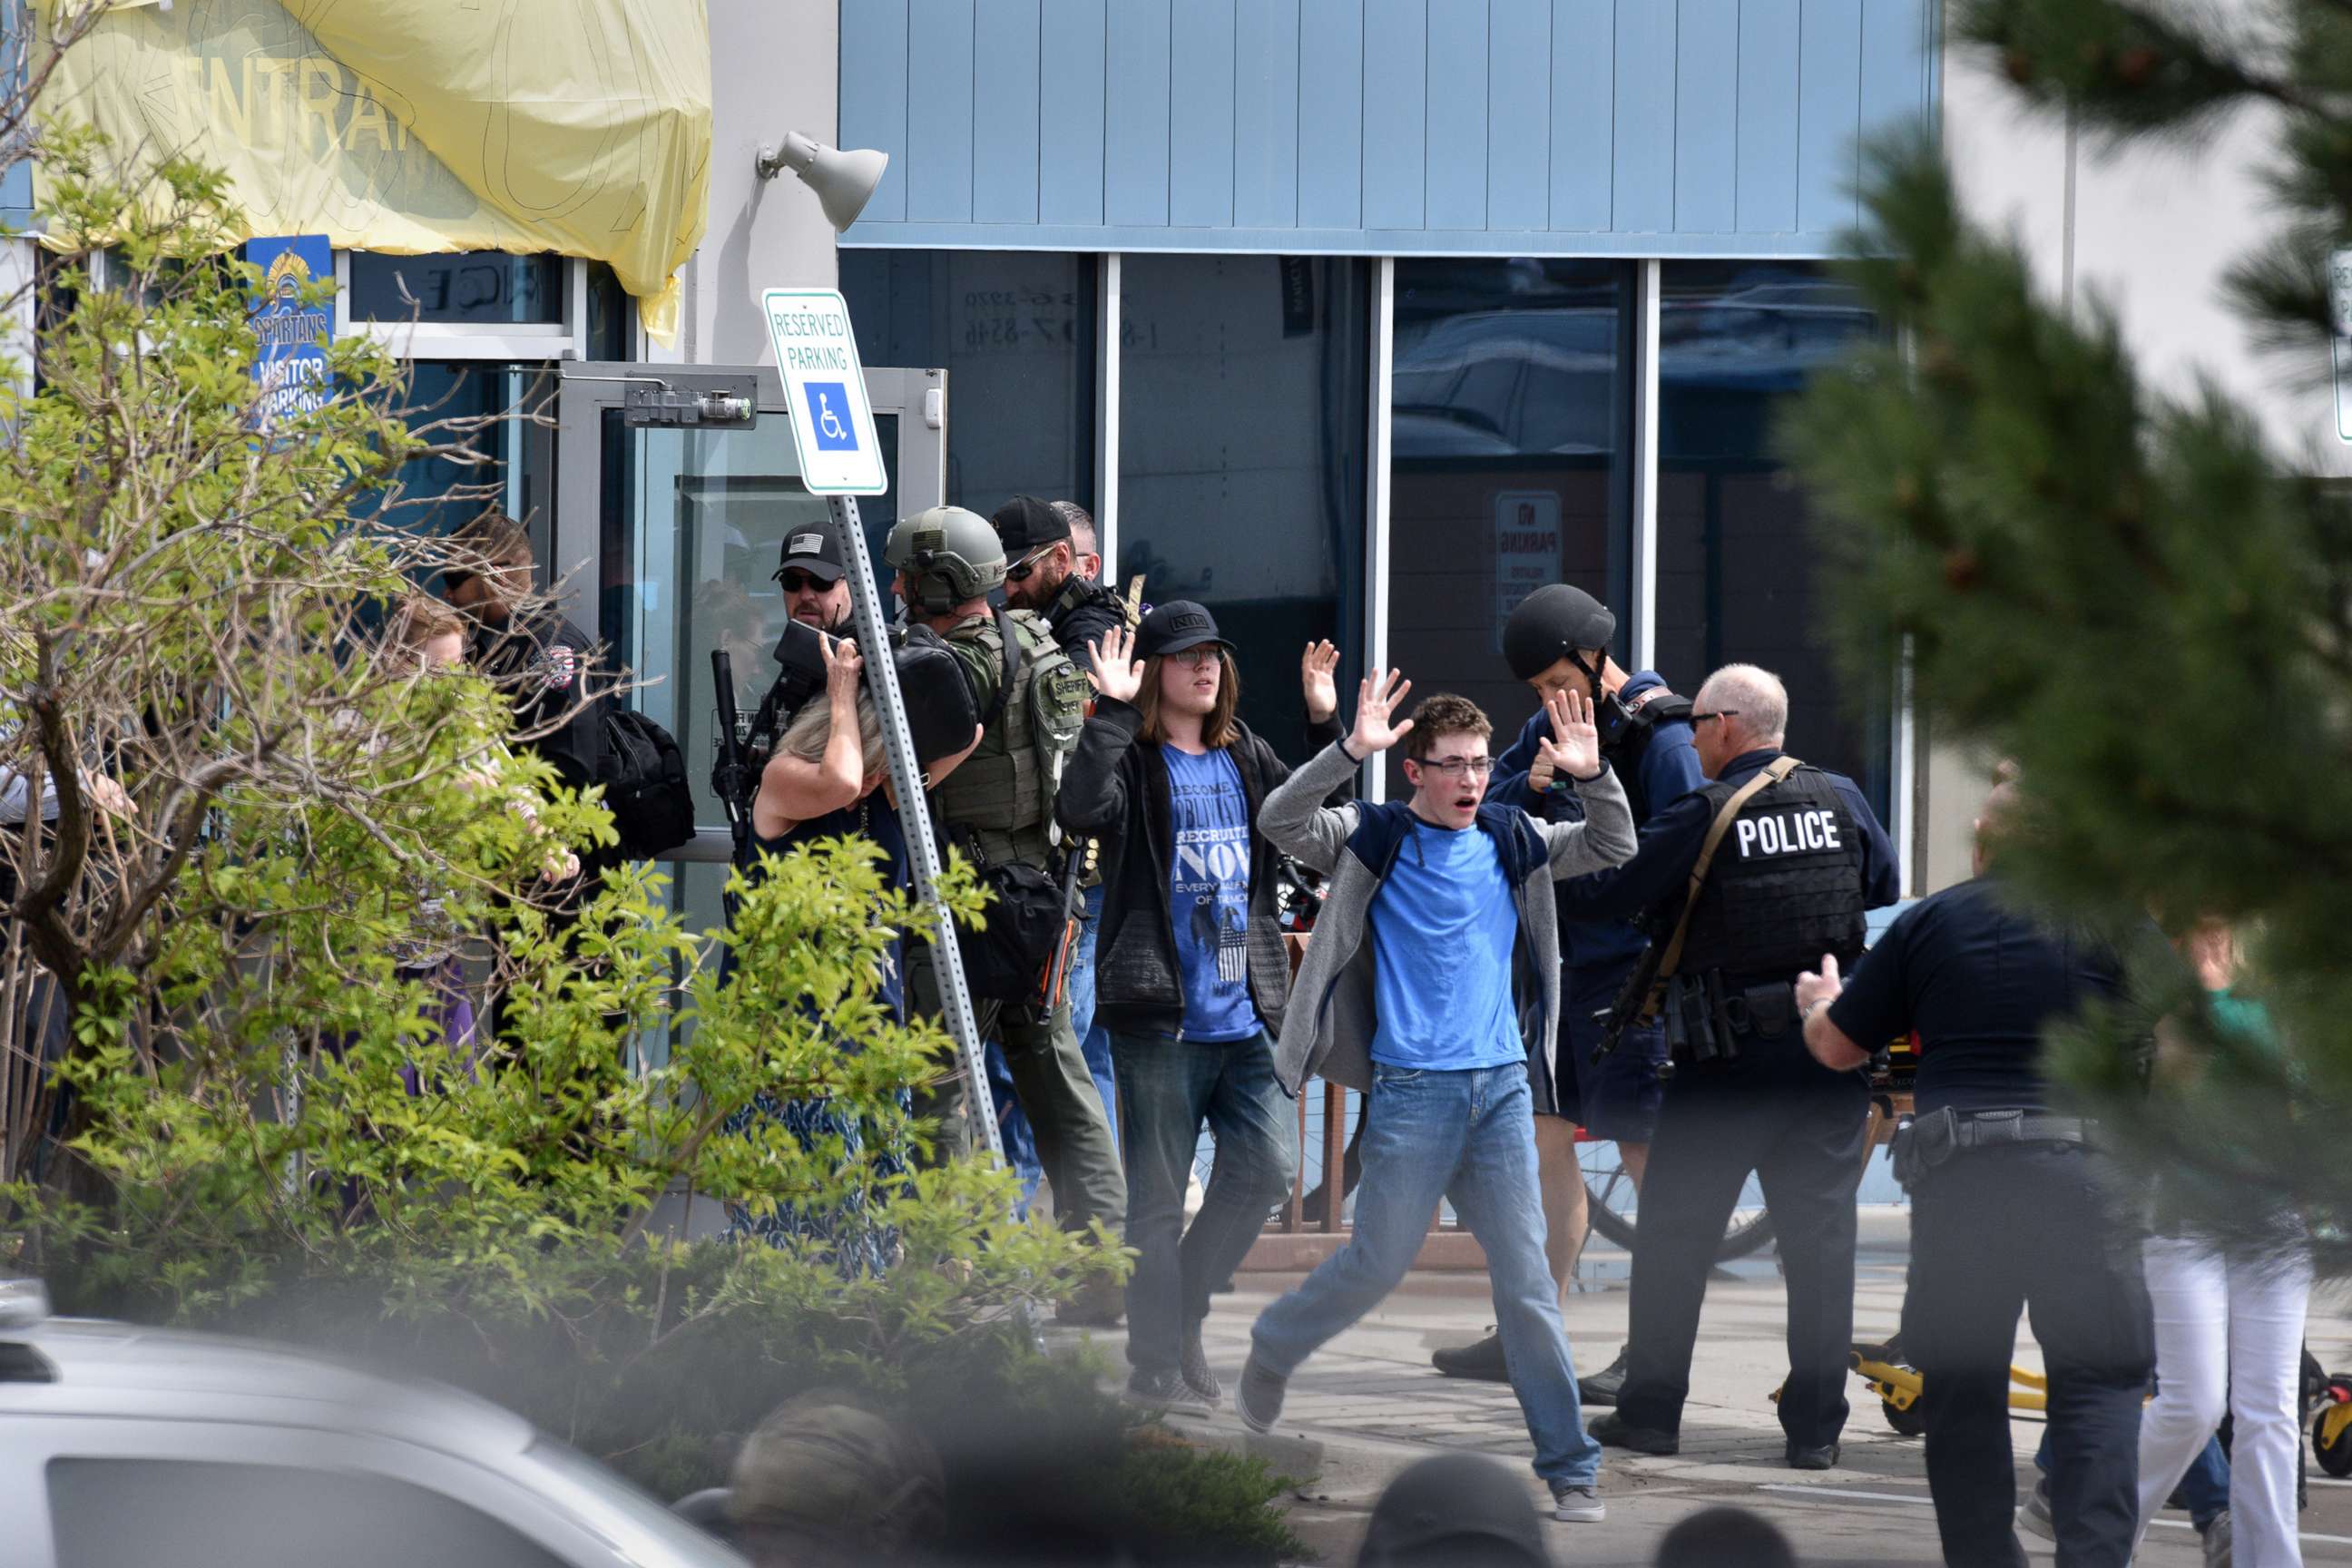 PHOTO: Students and teachers raise their hands as the exit the scene of a shooting at the STEM School Highlands Ranch on May 7, 2019 in Highlands Ranch, Colo.